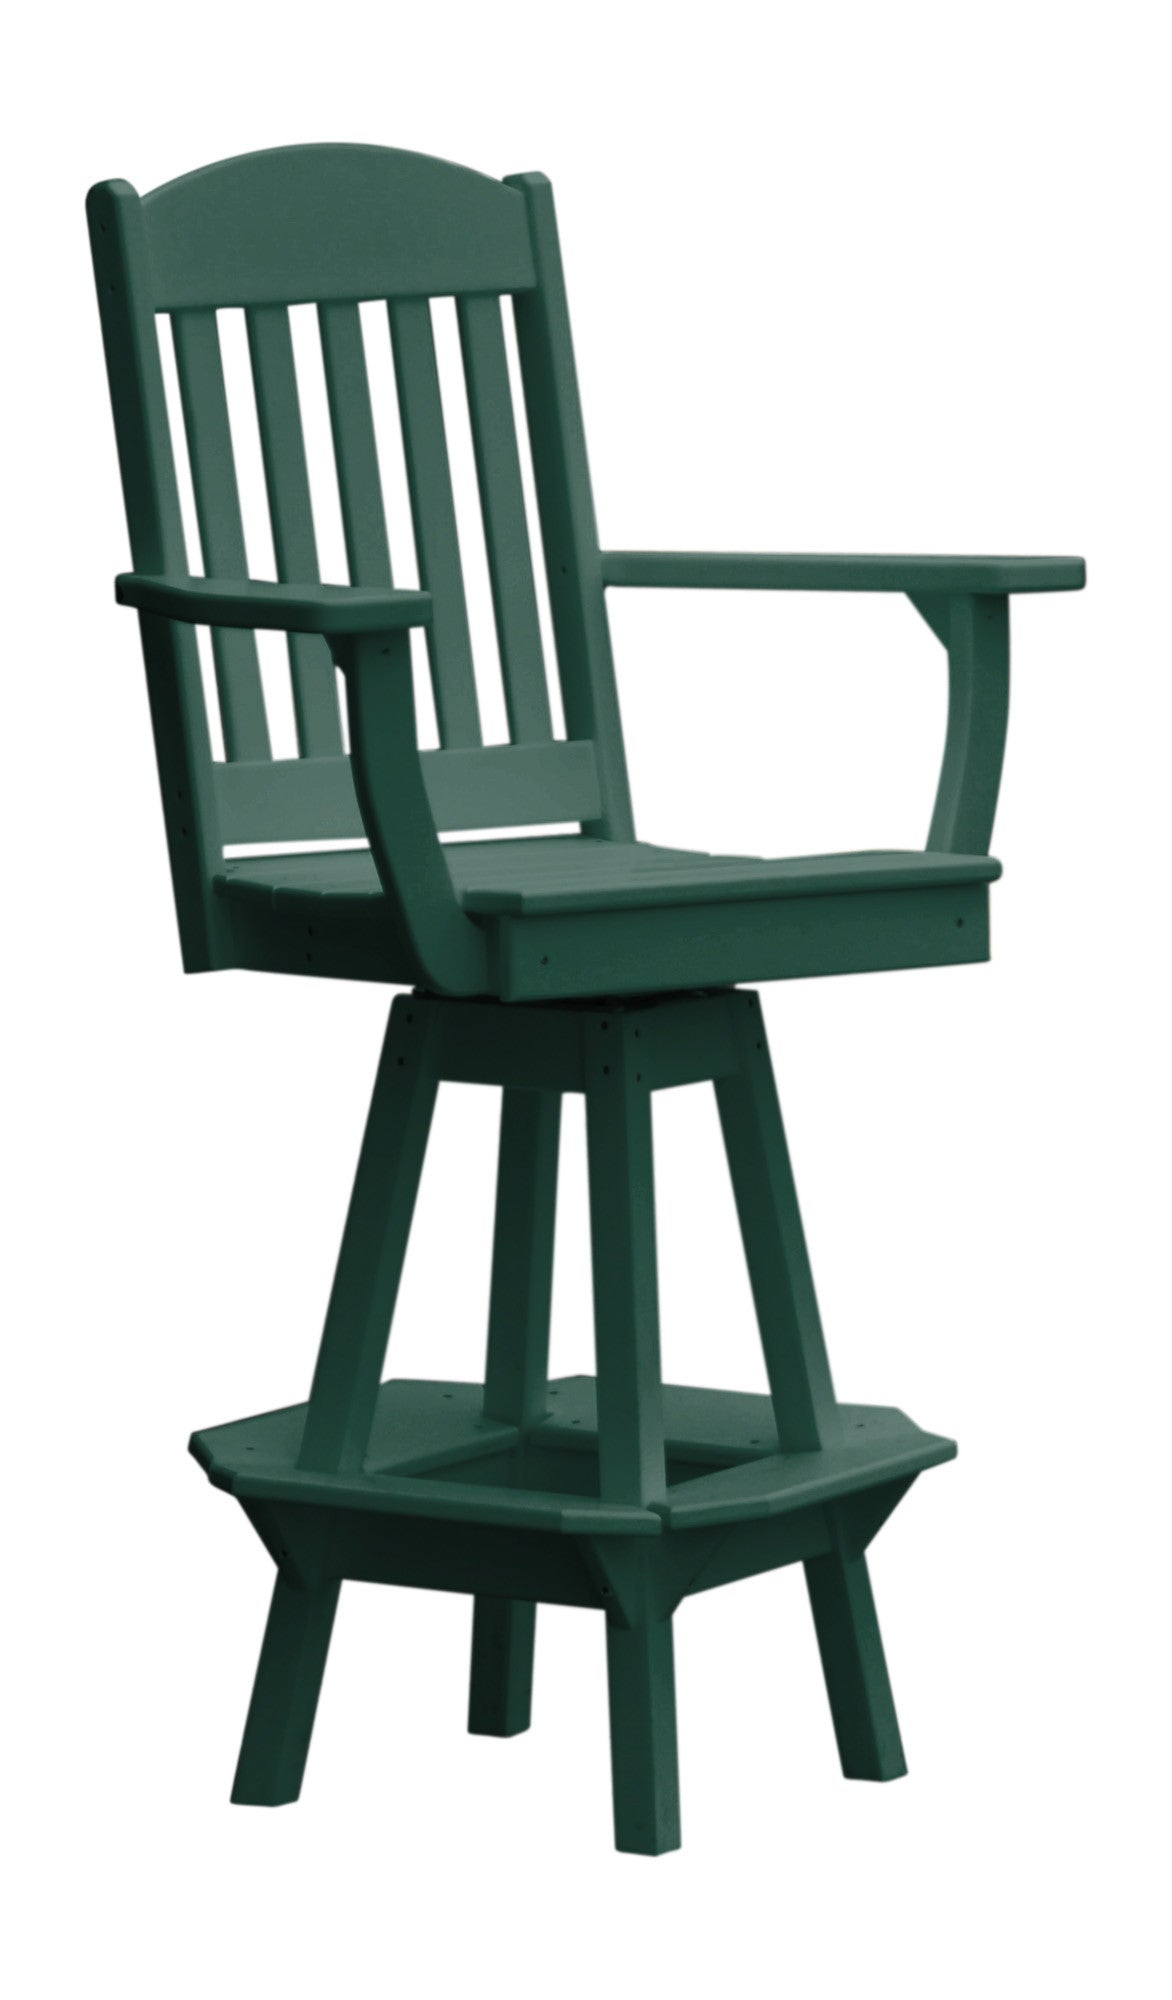 A&L Furniture Company Recycled Plastic Classic Swivel Bar Chair w/ Arms - Turf Green